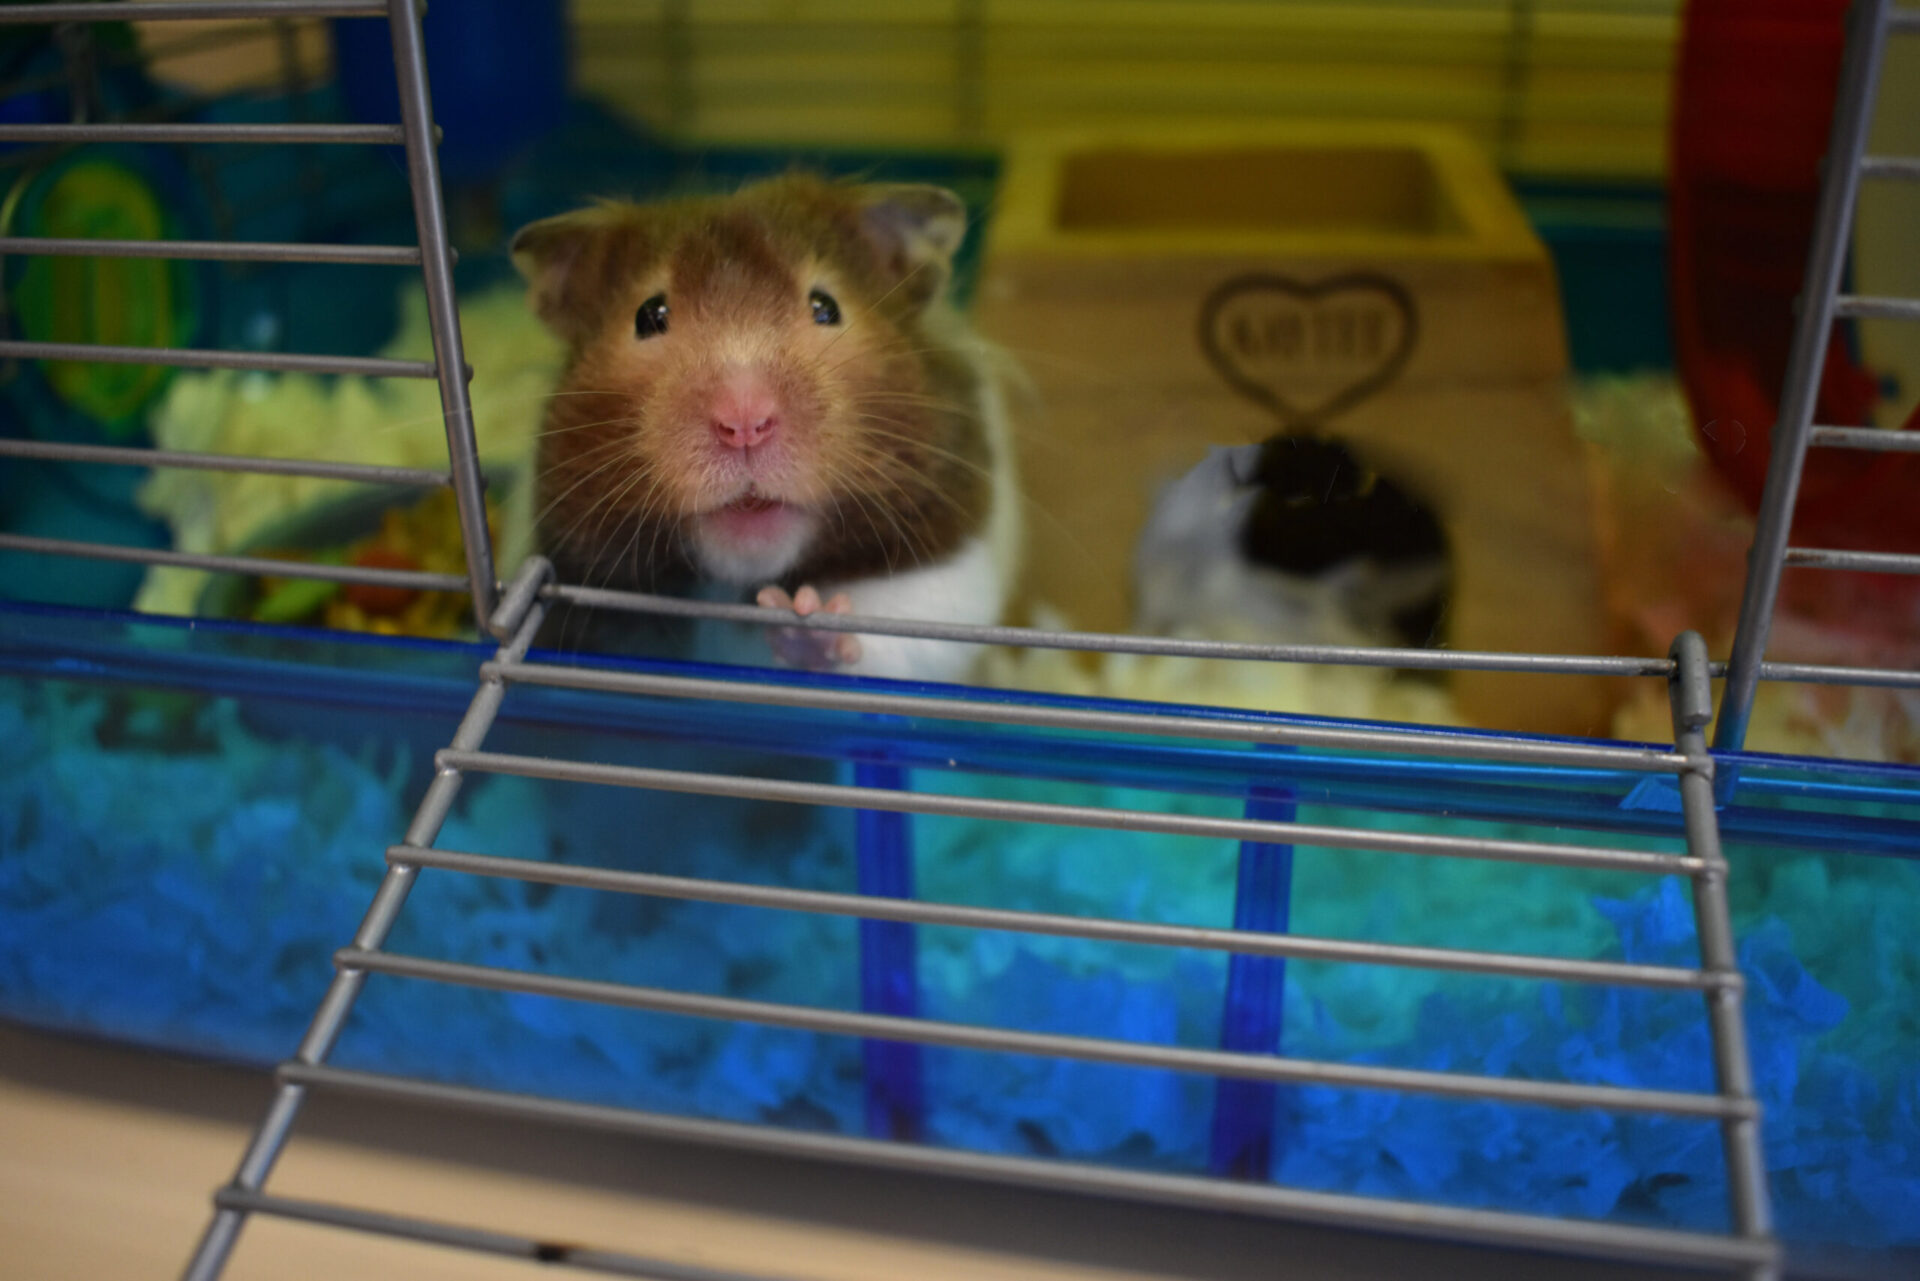 What is a Dwarf Hamster's Lifespan? How long do they live for?